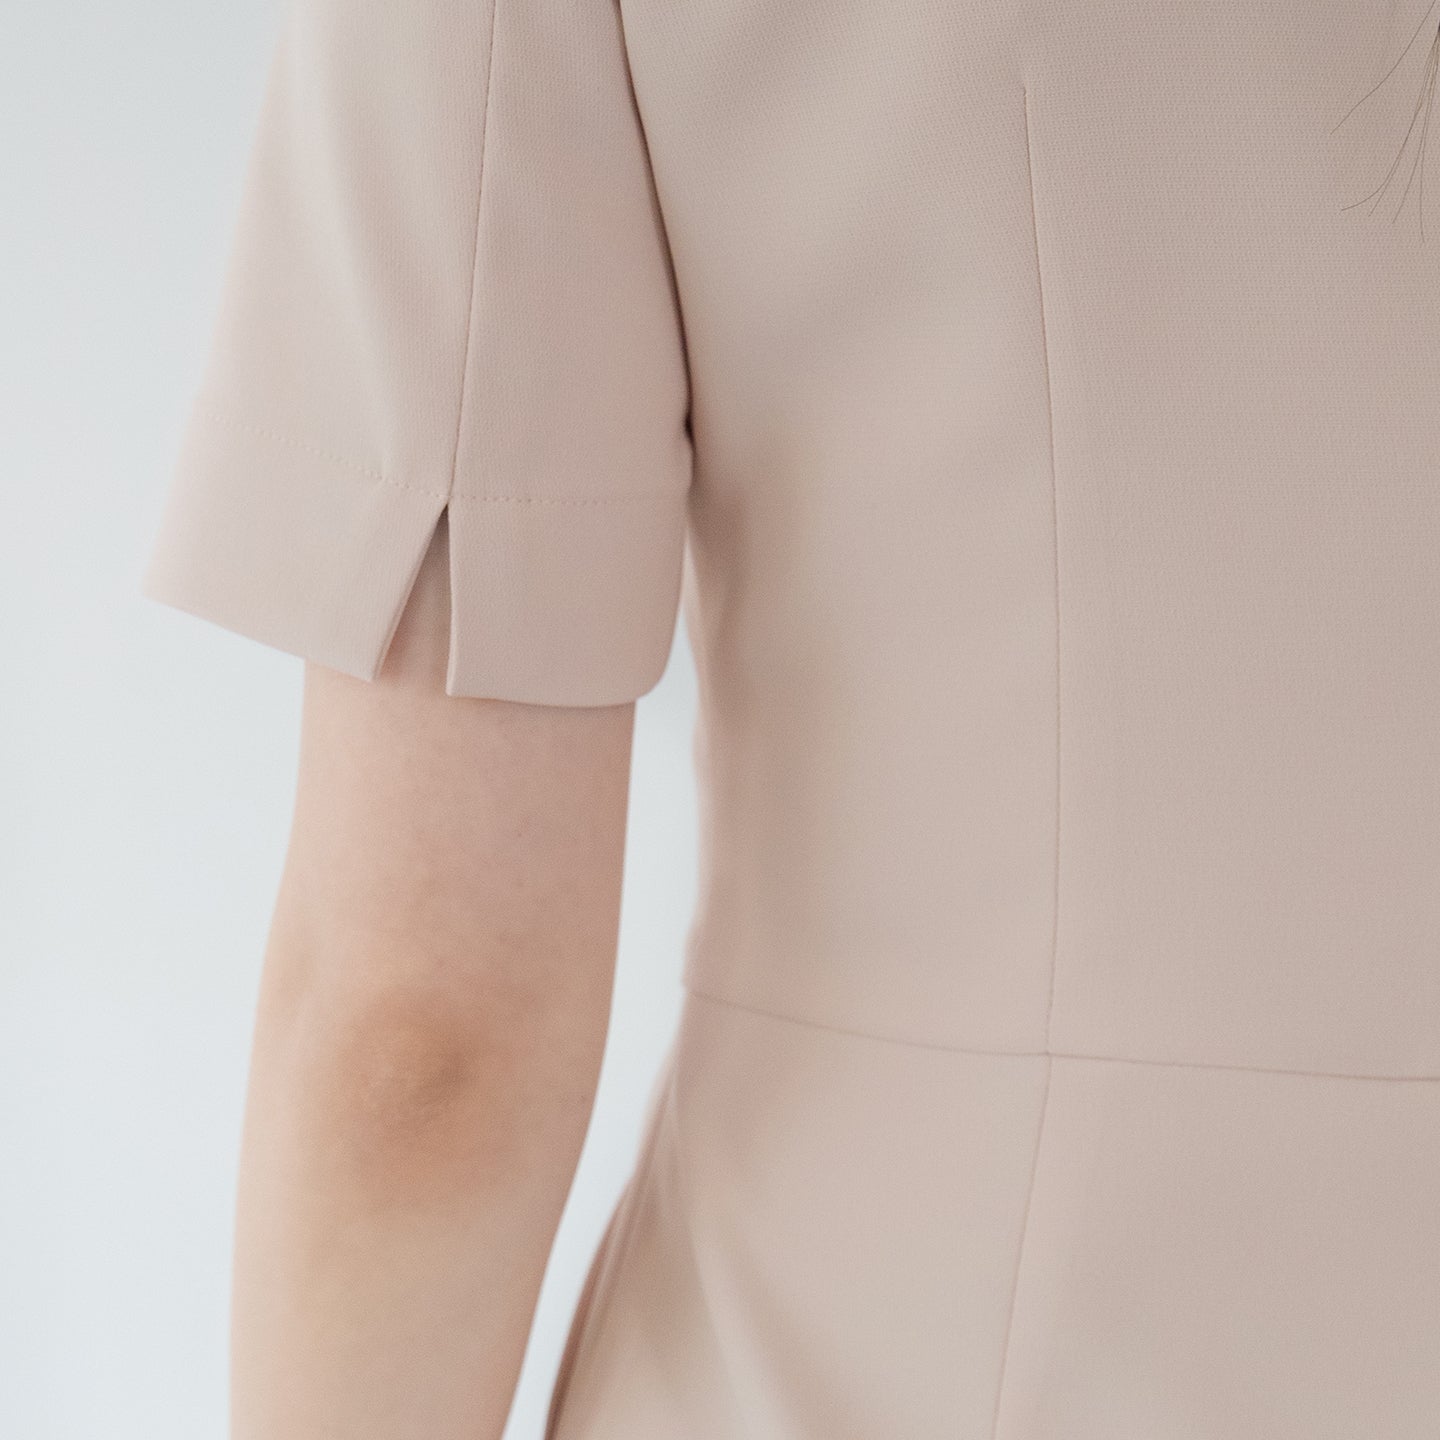 A close-up of a beige round-neck top's sleeve, highlighting the back slit detail on the short sleeve,Beige